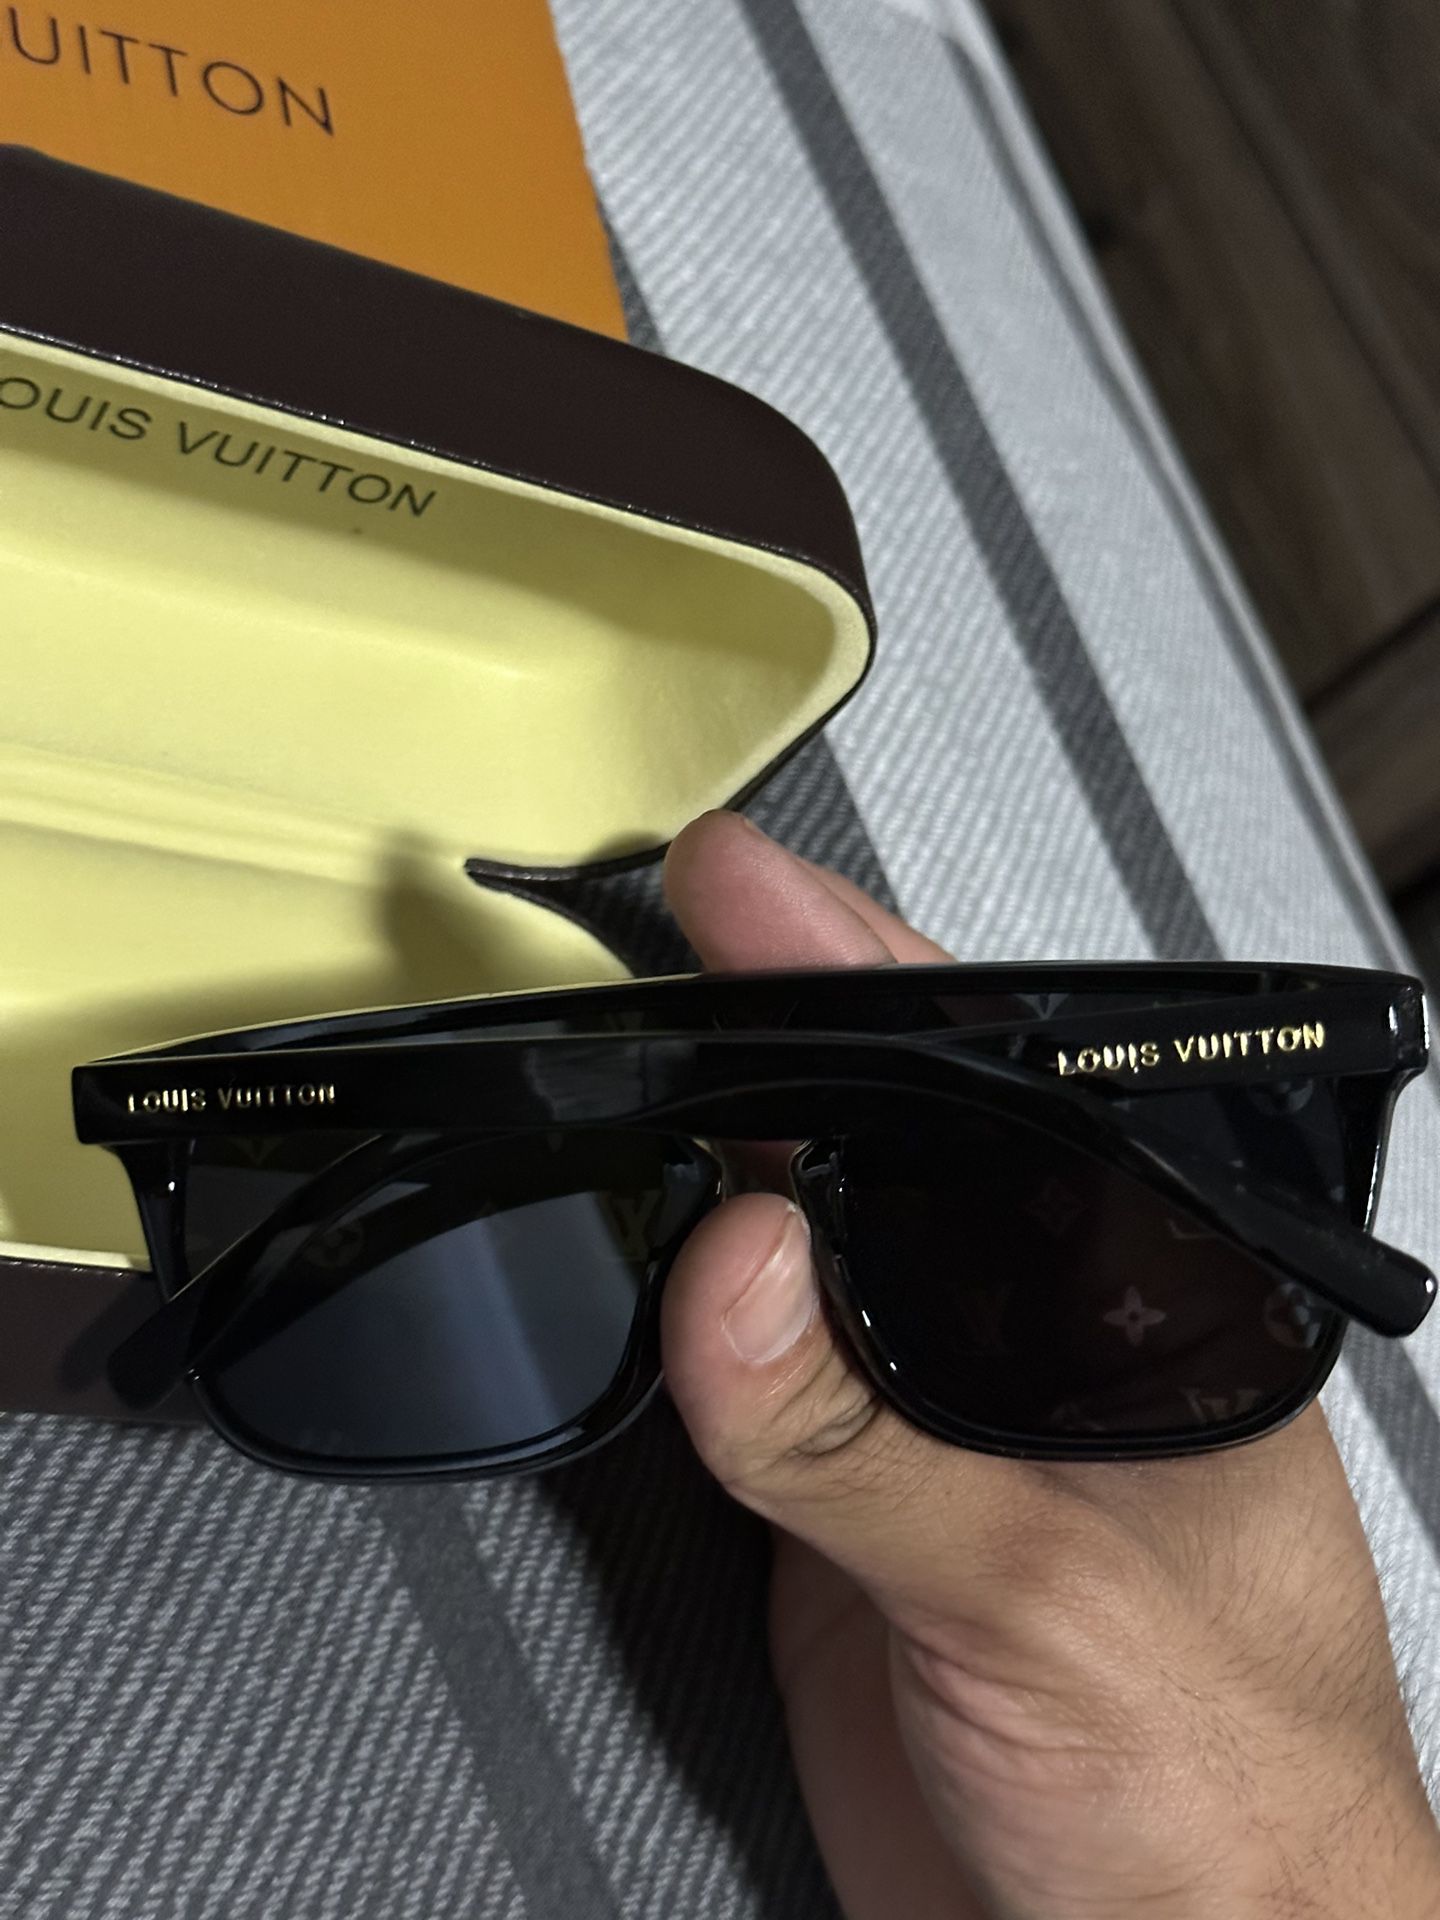 Louis Vuitton Sunglasses Cyclone for Sale in Grandview, MO - OfferUp